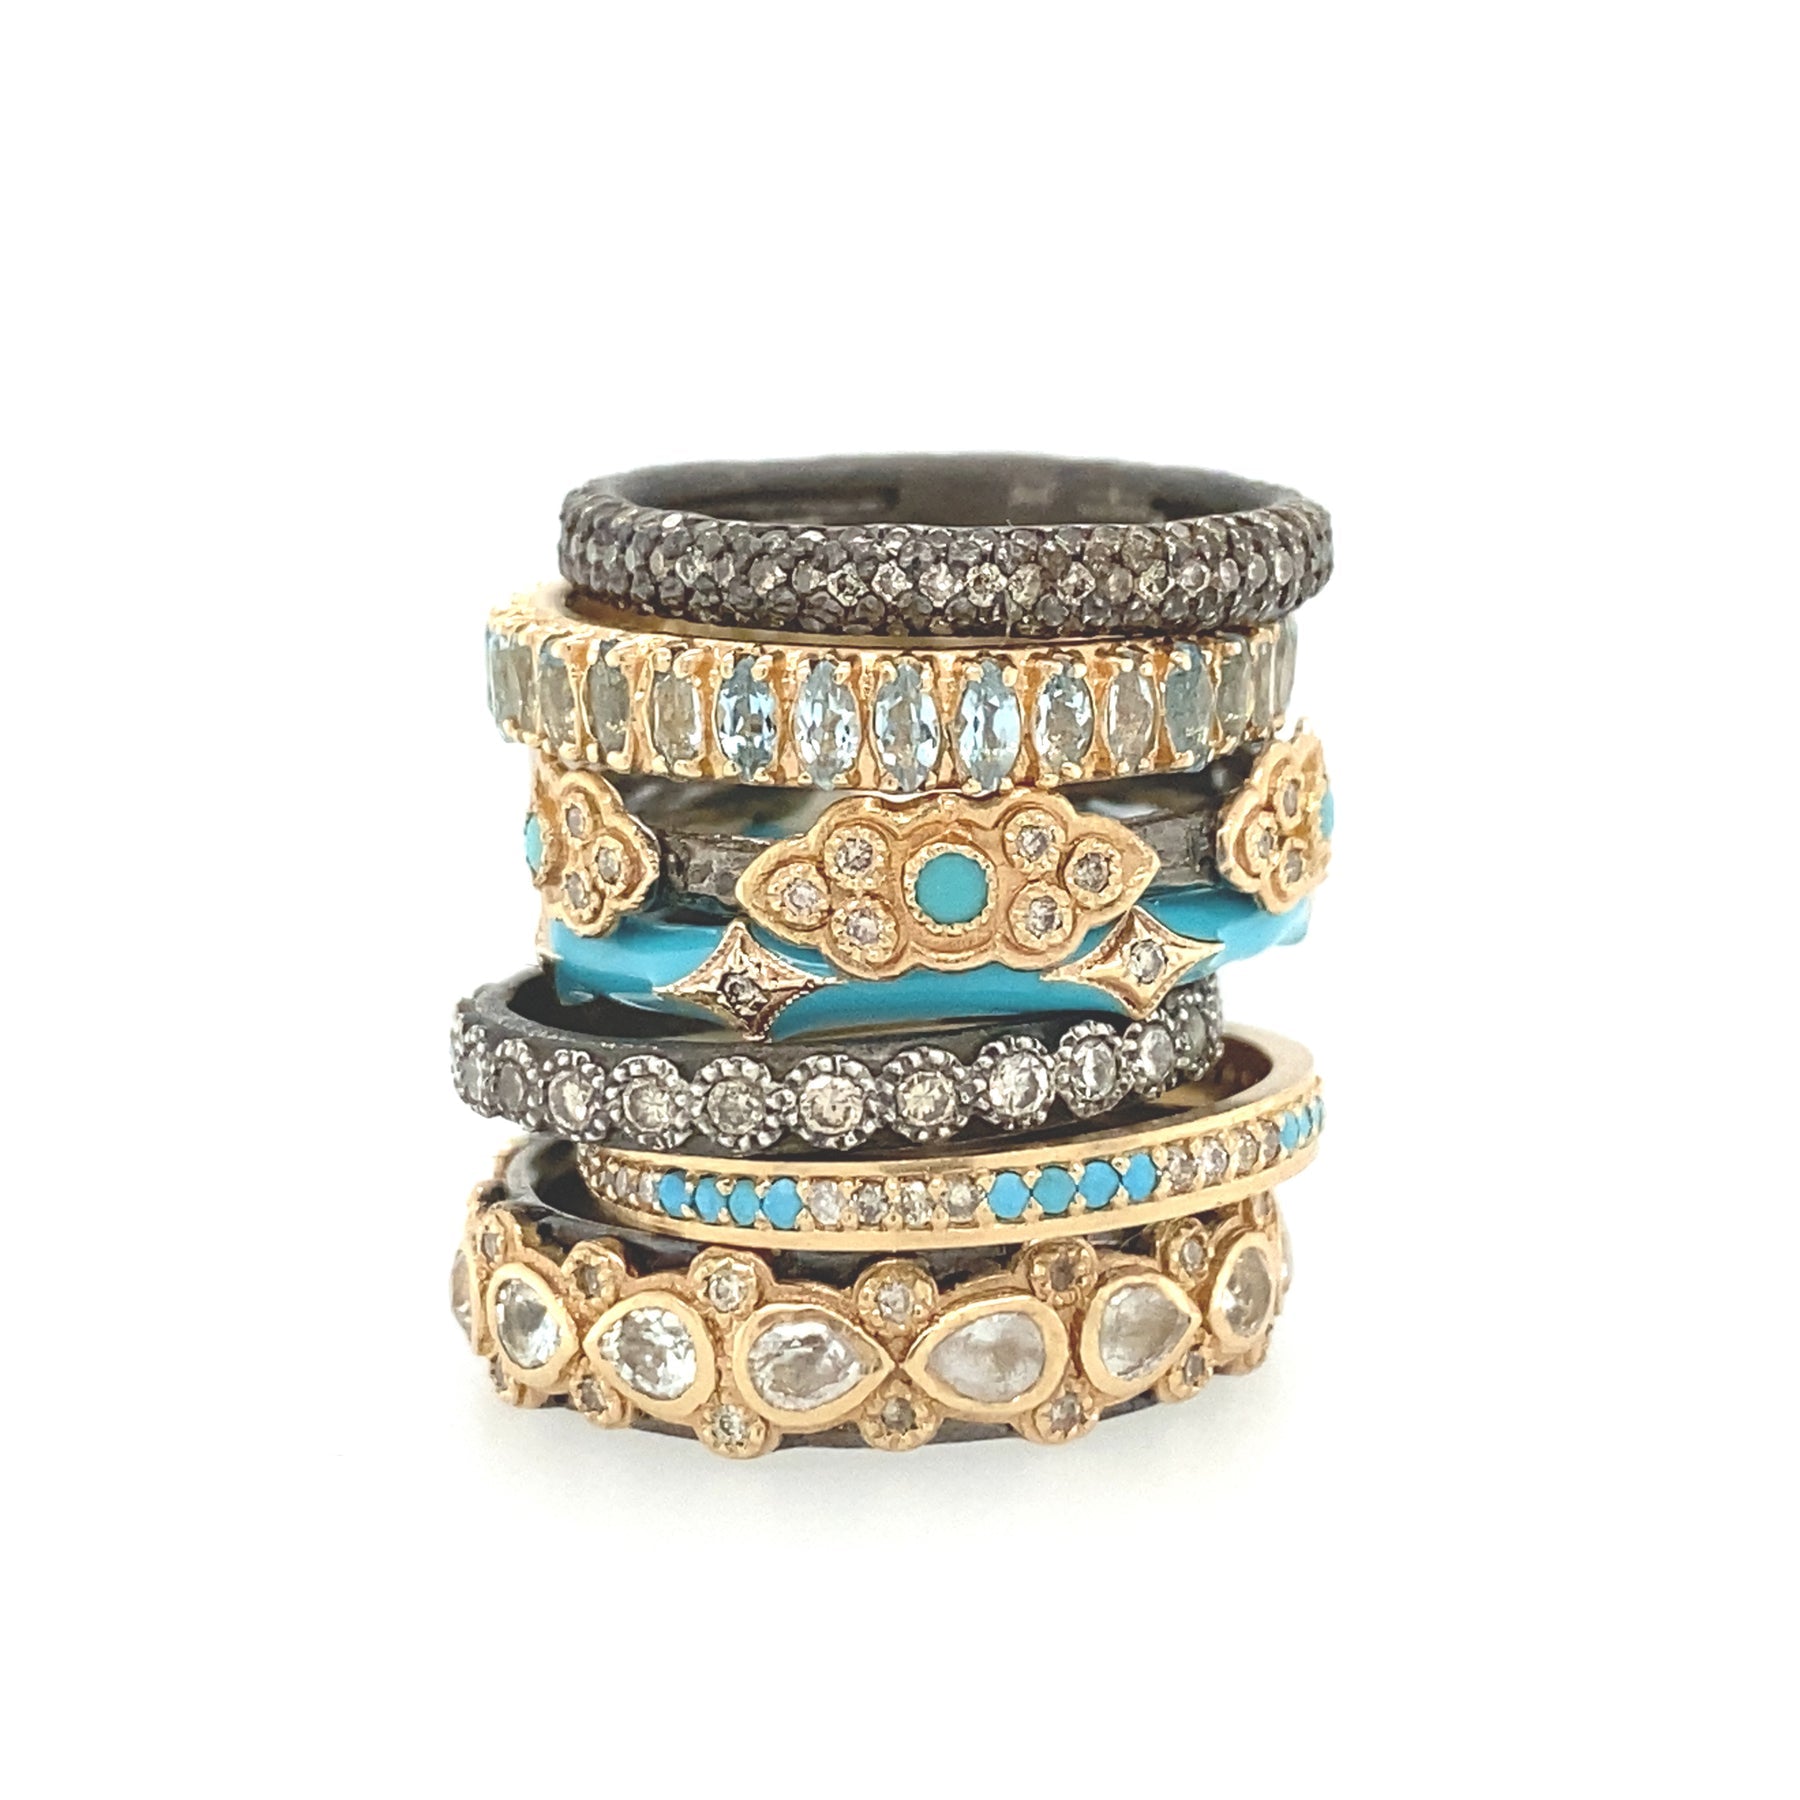 14K Rose Gold and Sterling Silver Crivelli Stack Ring in Turquoise Enamel with Champagne Diamonds (0.04 TCW)